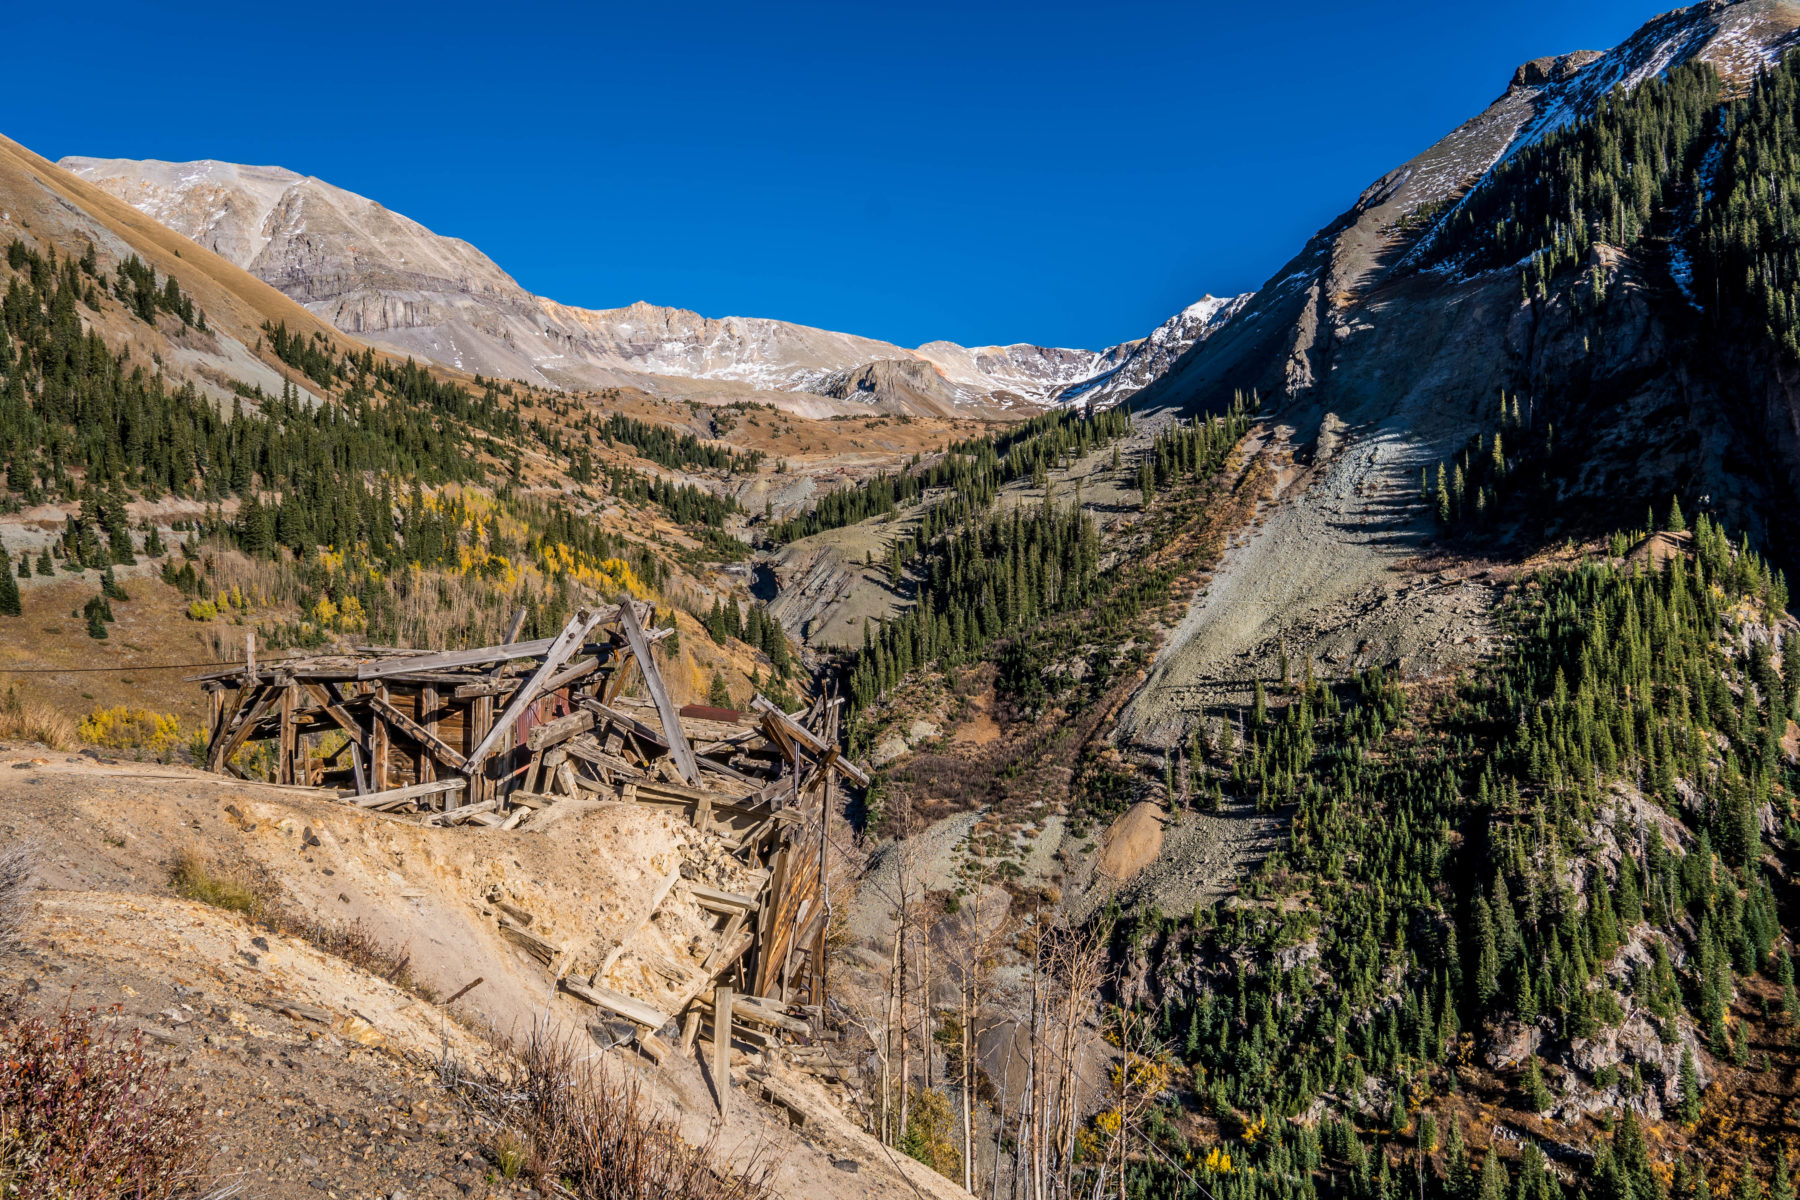 Remains of the Tomboy Smuggler-Union Mine Complex at the Bullion Tunnel on the north side of the Telluride Valley